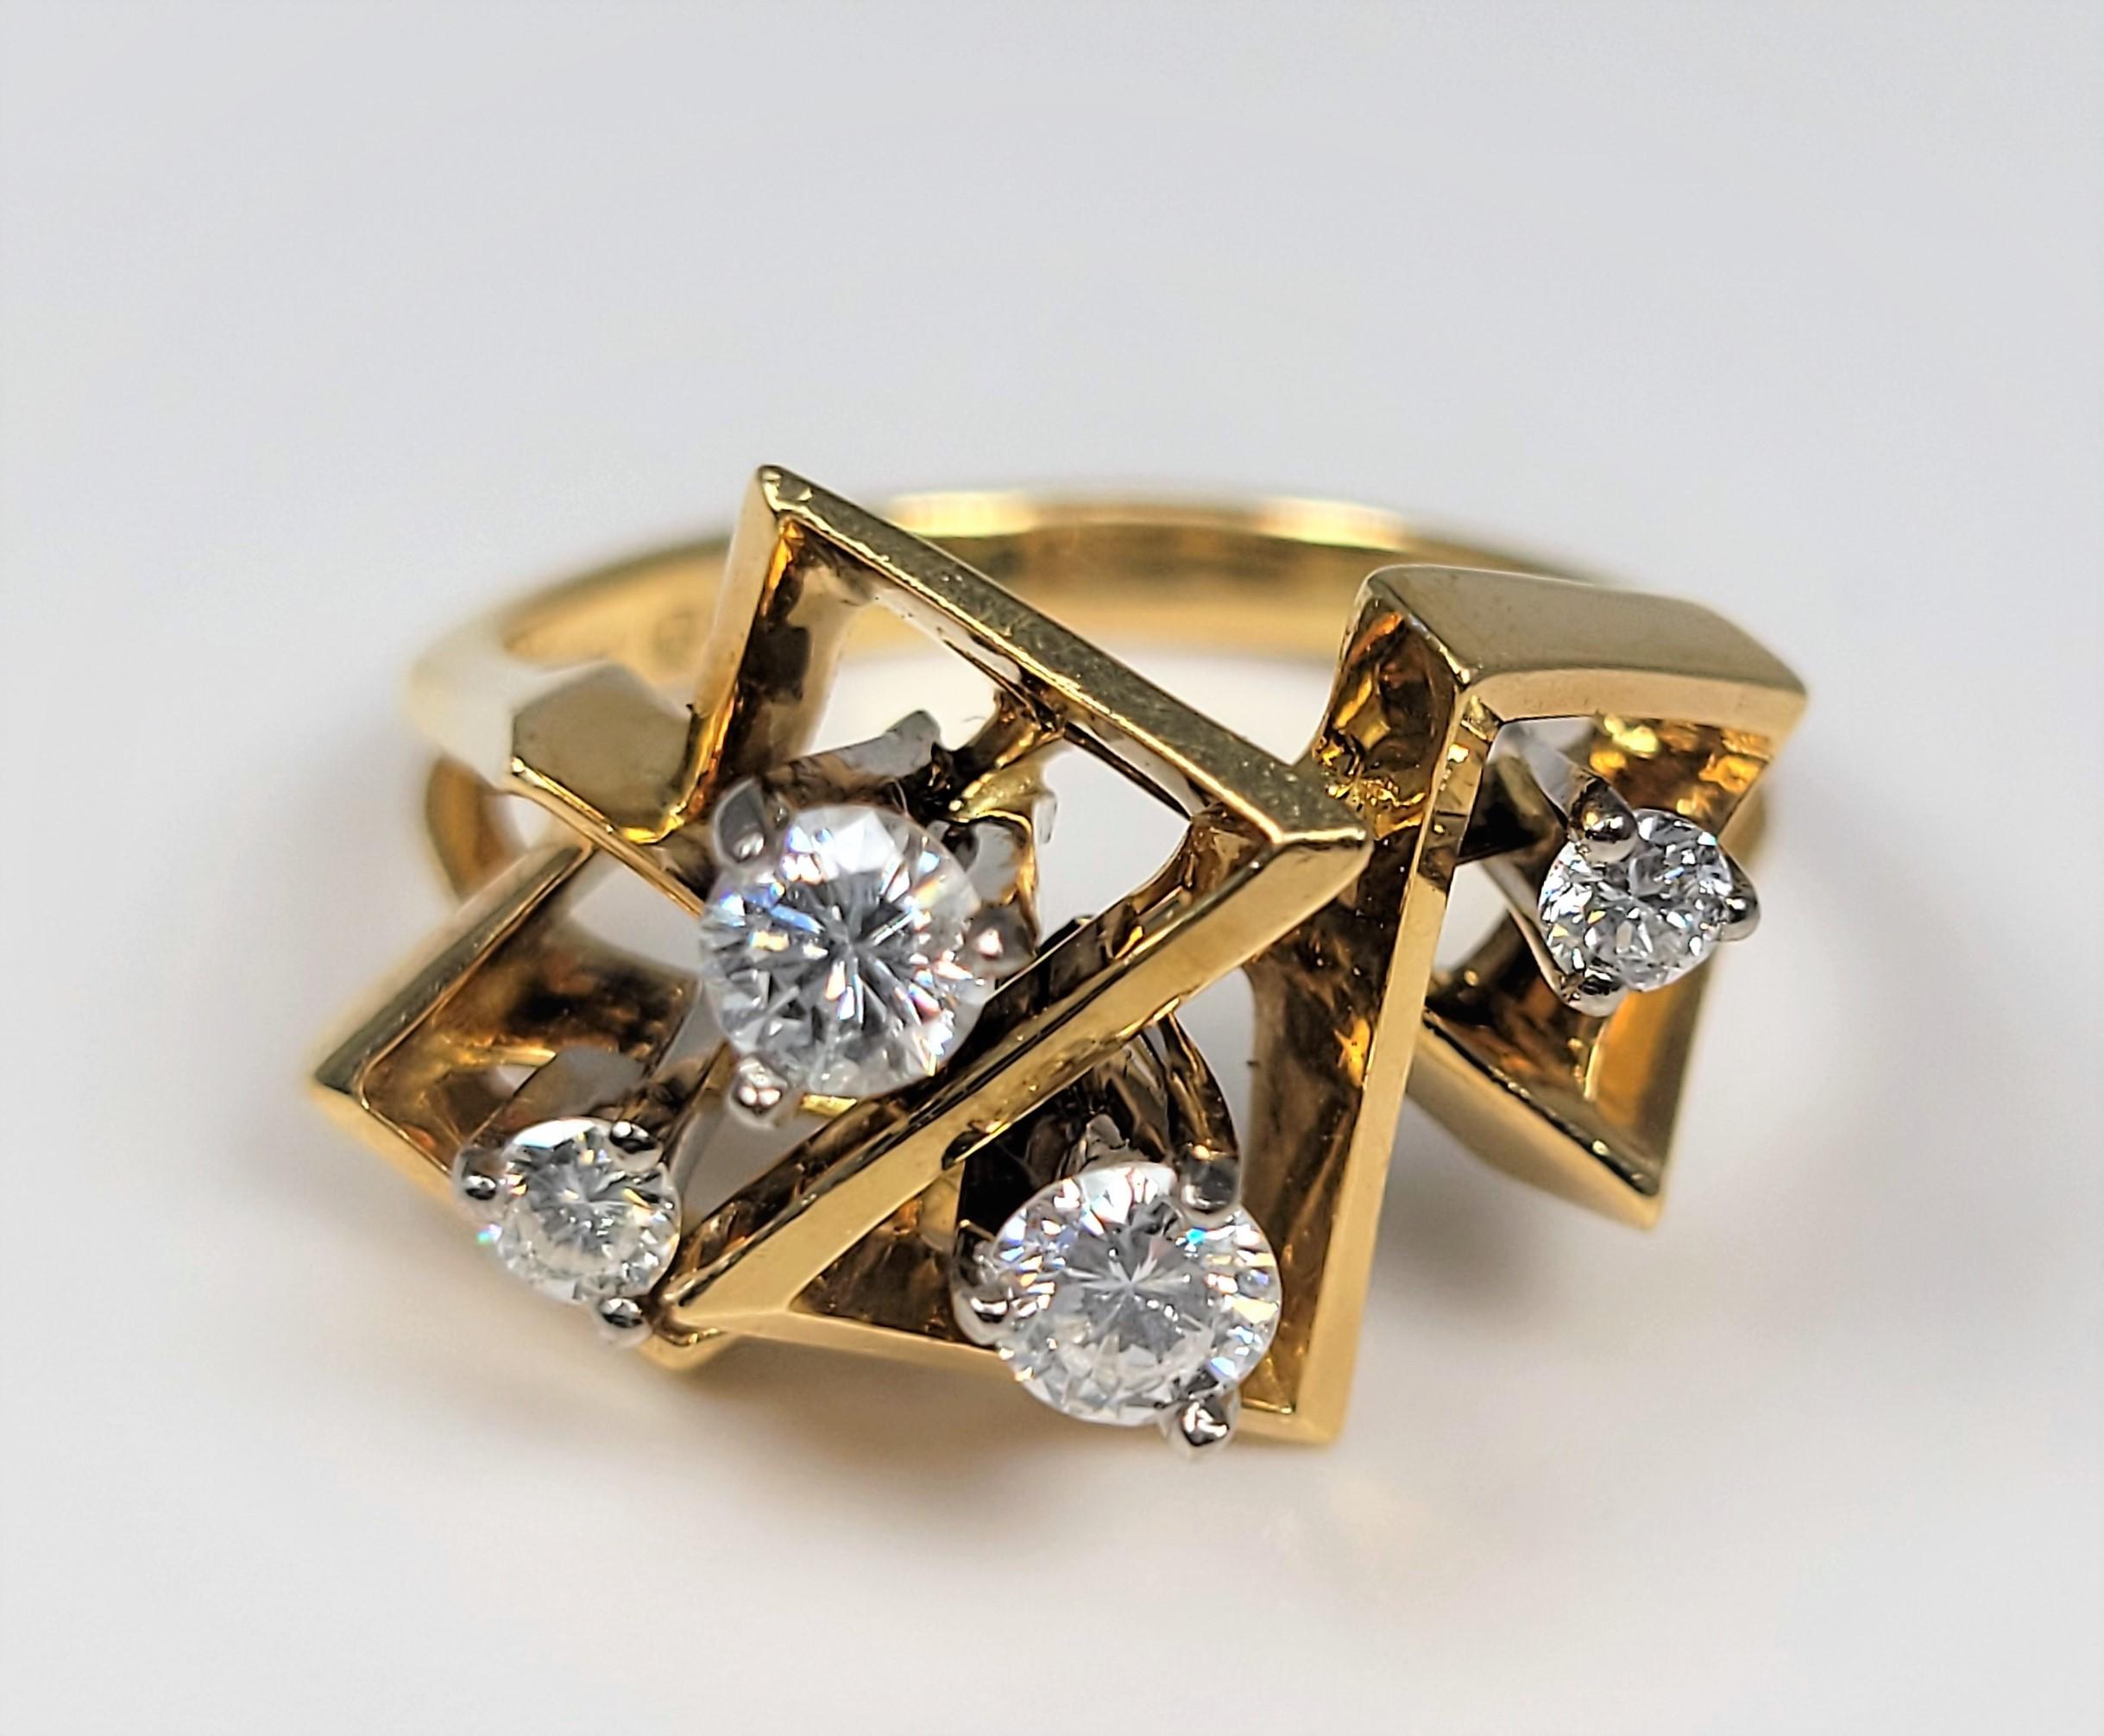 A treasure from the bygone days!  This ring is in 18 karat yellow gold and supports 0.40 carats of diamonds.

